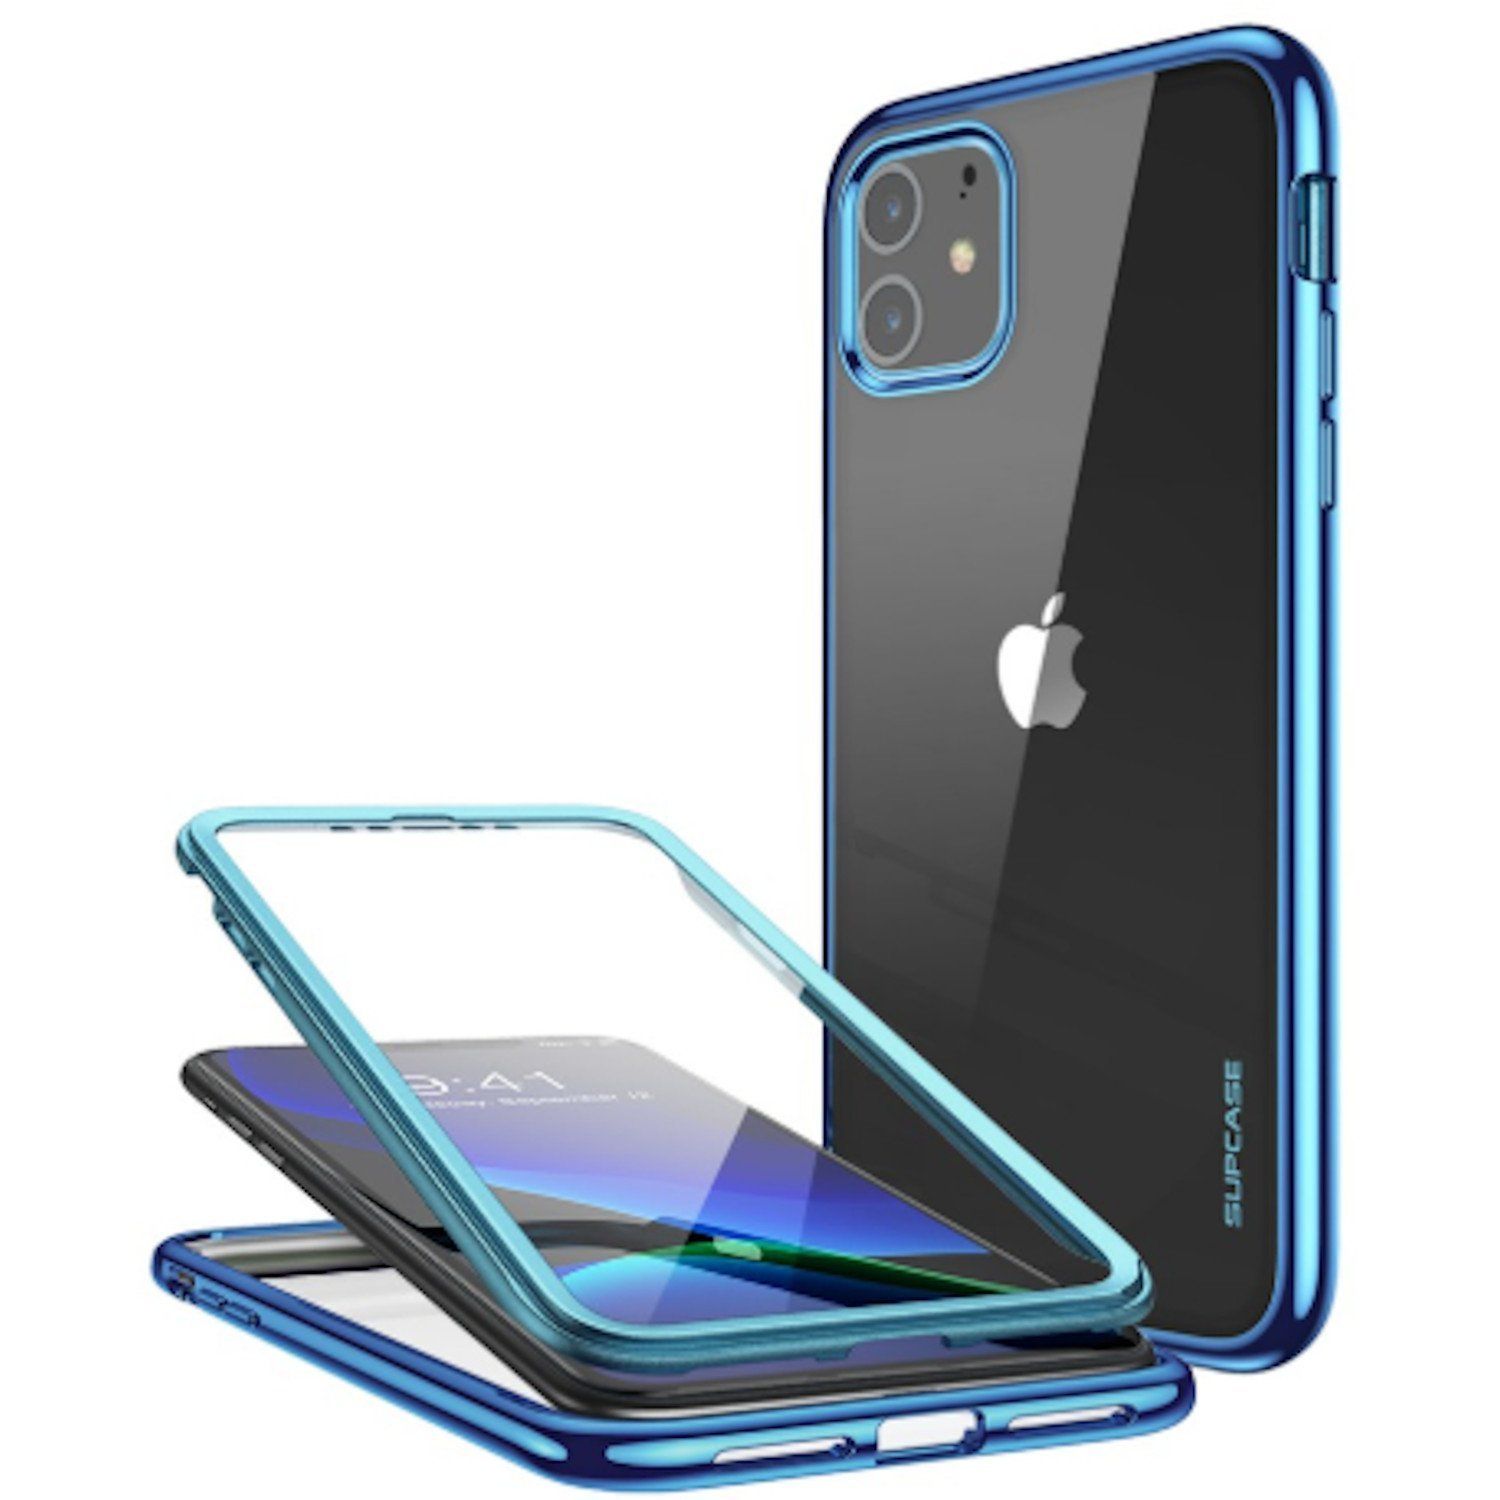 Supcase UB Electro Series Slim Hybrid Full-Body Protective Case for iPhone 11 Pro 5.8"(2019)(With Build-in Screen Protector)